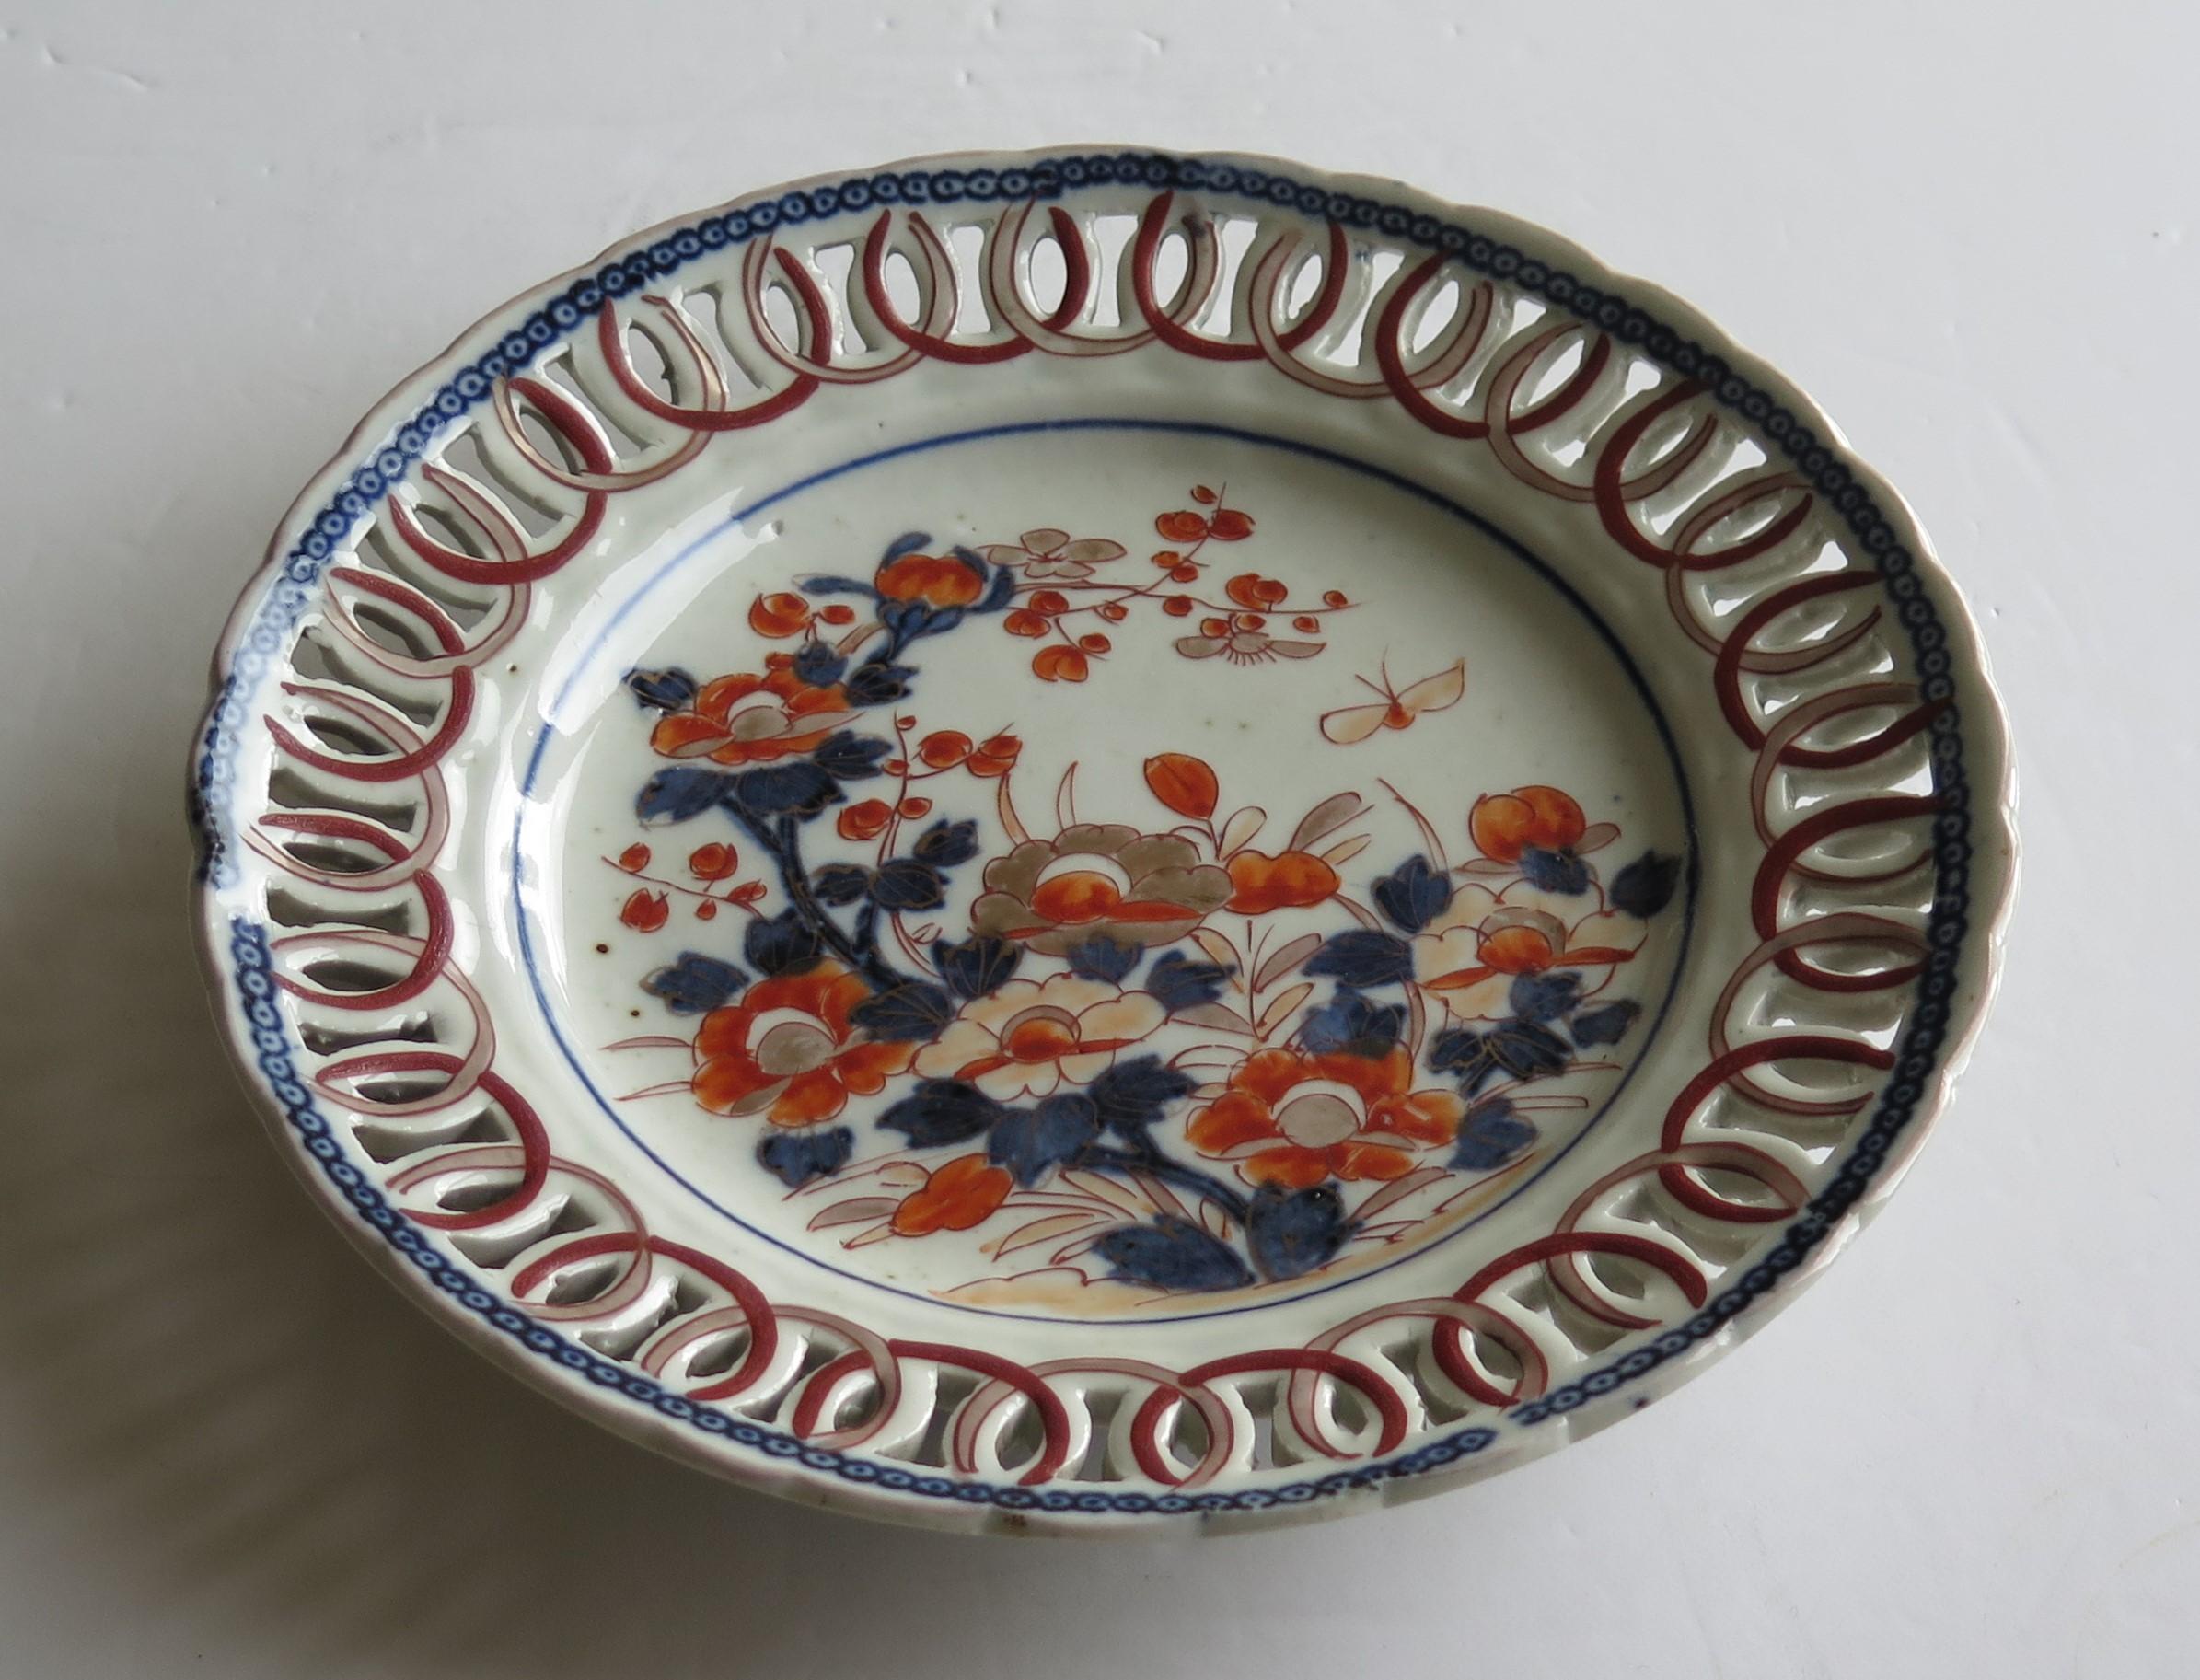 This is a good quality Japanese porcelain plate or shallow dish, of reticulated form with an interlinking open chain formed around its outer rim, which we date to circa 1800. 

The plate is decorated in the Imari style with varying shades of